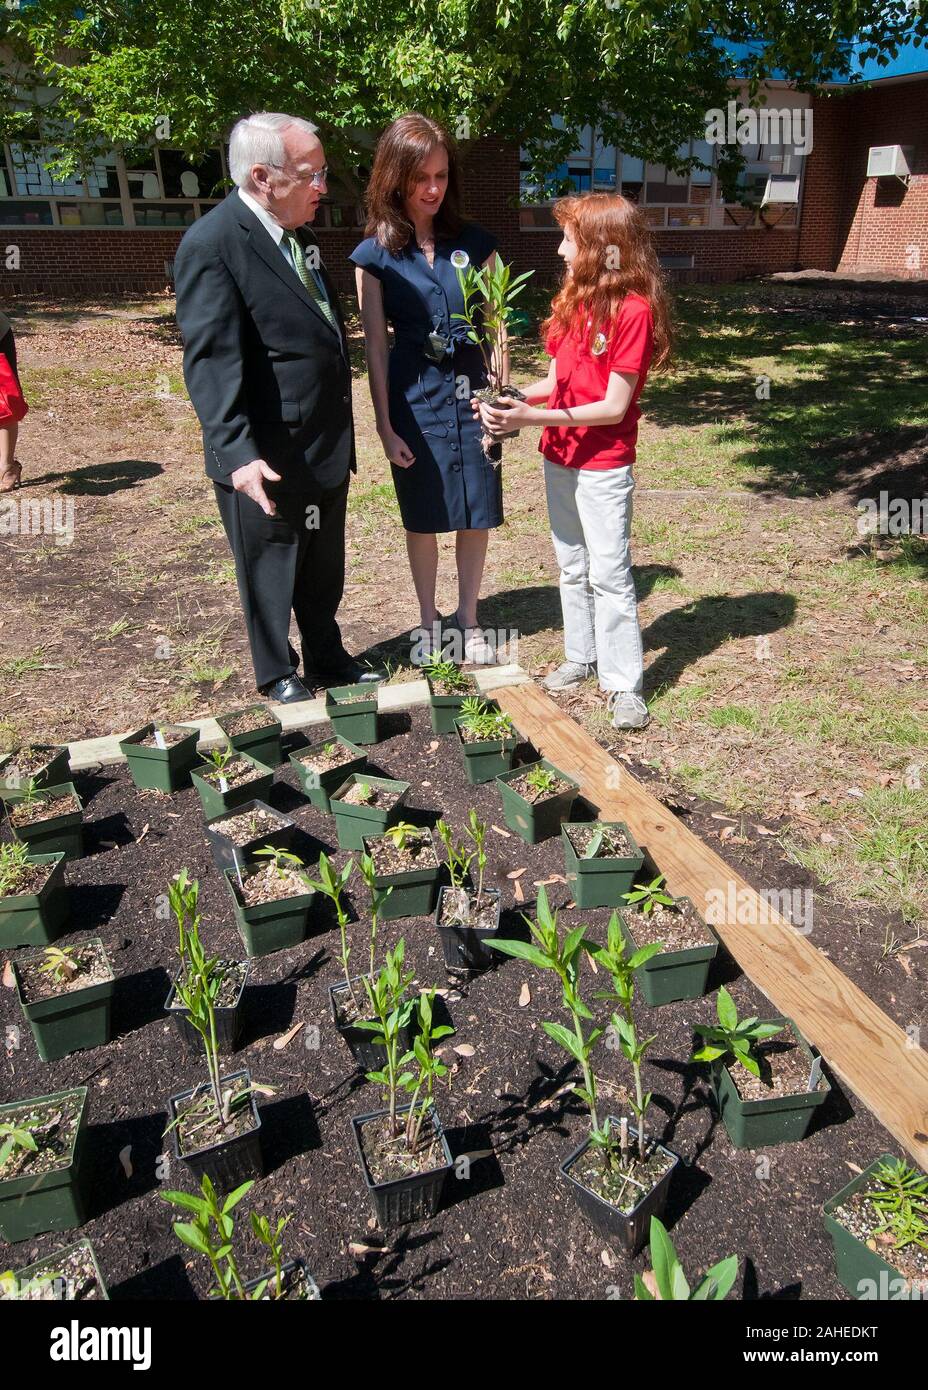 Dr. Kevin Concannon (left), Undersecretary Food Consumer and Nutrition Services Dr. Elizabeth Hagen (center), Undersecretary Food Safety and Emily Wise (right), a Fifth Grade student at Maryland City Elementary School in Laurel, Maryland discuss the plants native to Maryland that will be going into the school garden. Undersecretary Concannon and Undersecretary Hagen were at Maryland Elementary for the USDA, Food Safety Inspection Service, Food Safety Education Camp Thu, May 5, 2011. Stock Photo